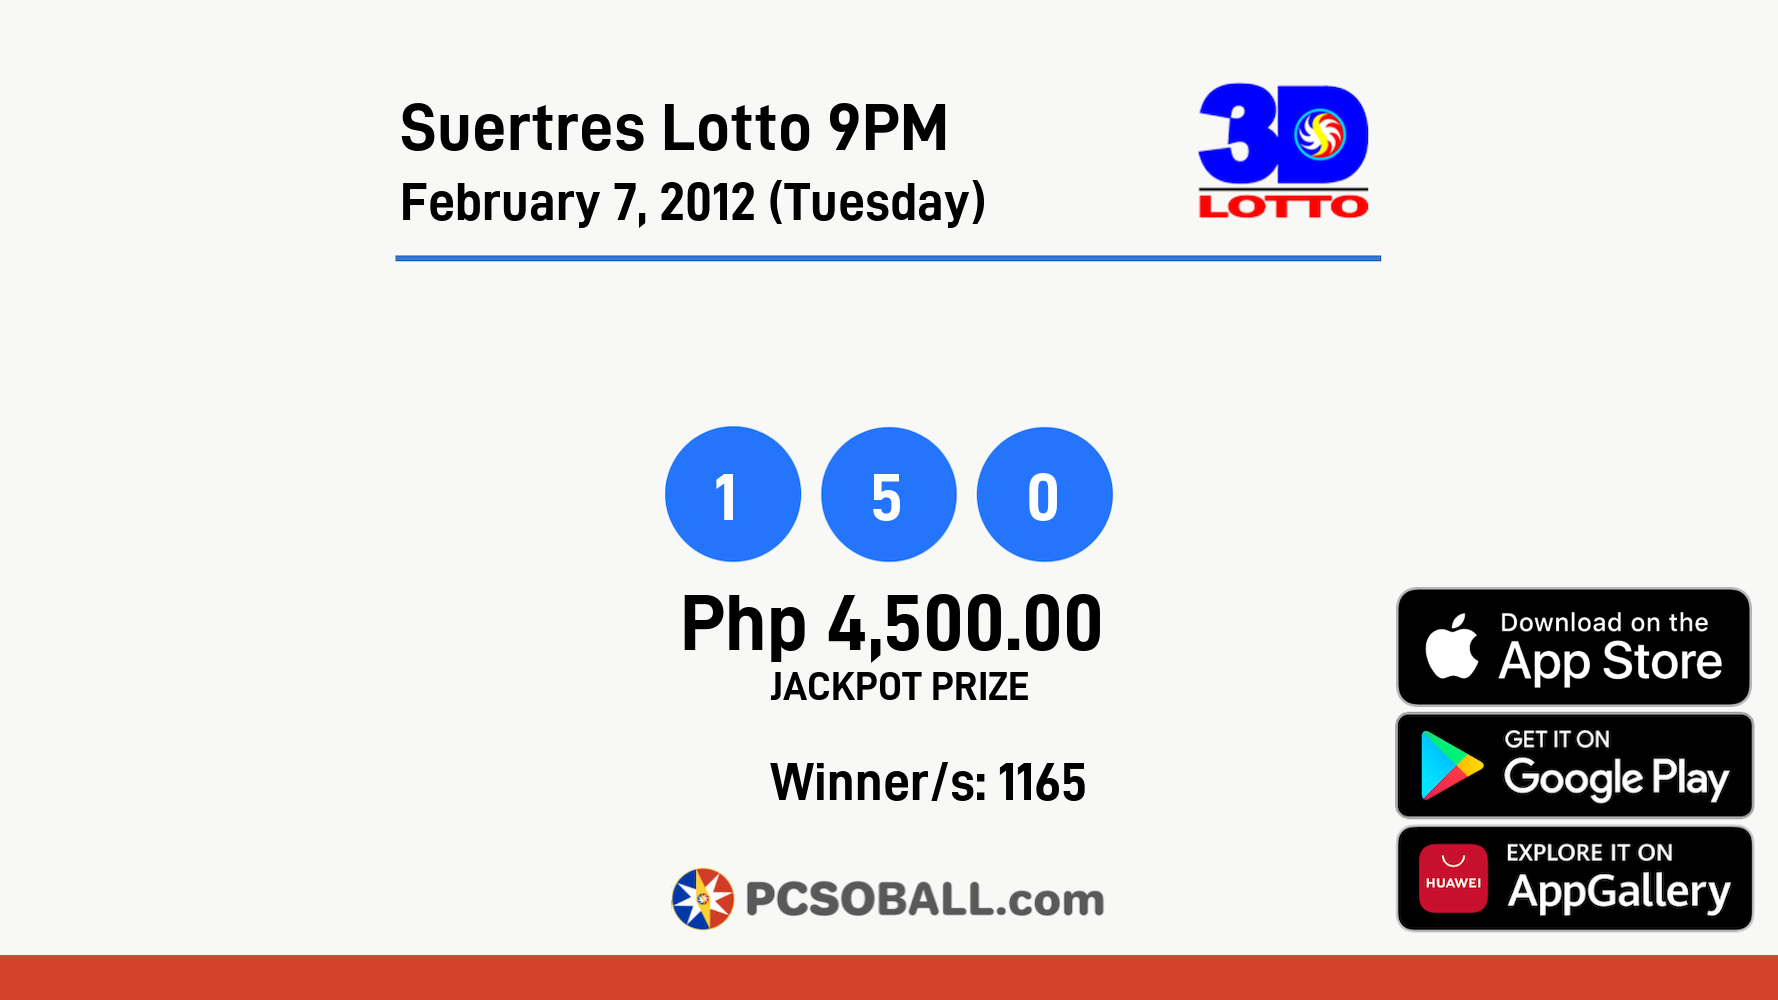 Suertres Lotto 9PM February 7, 2012 (Tuesday) Result